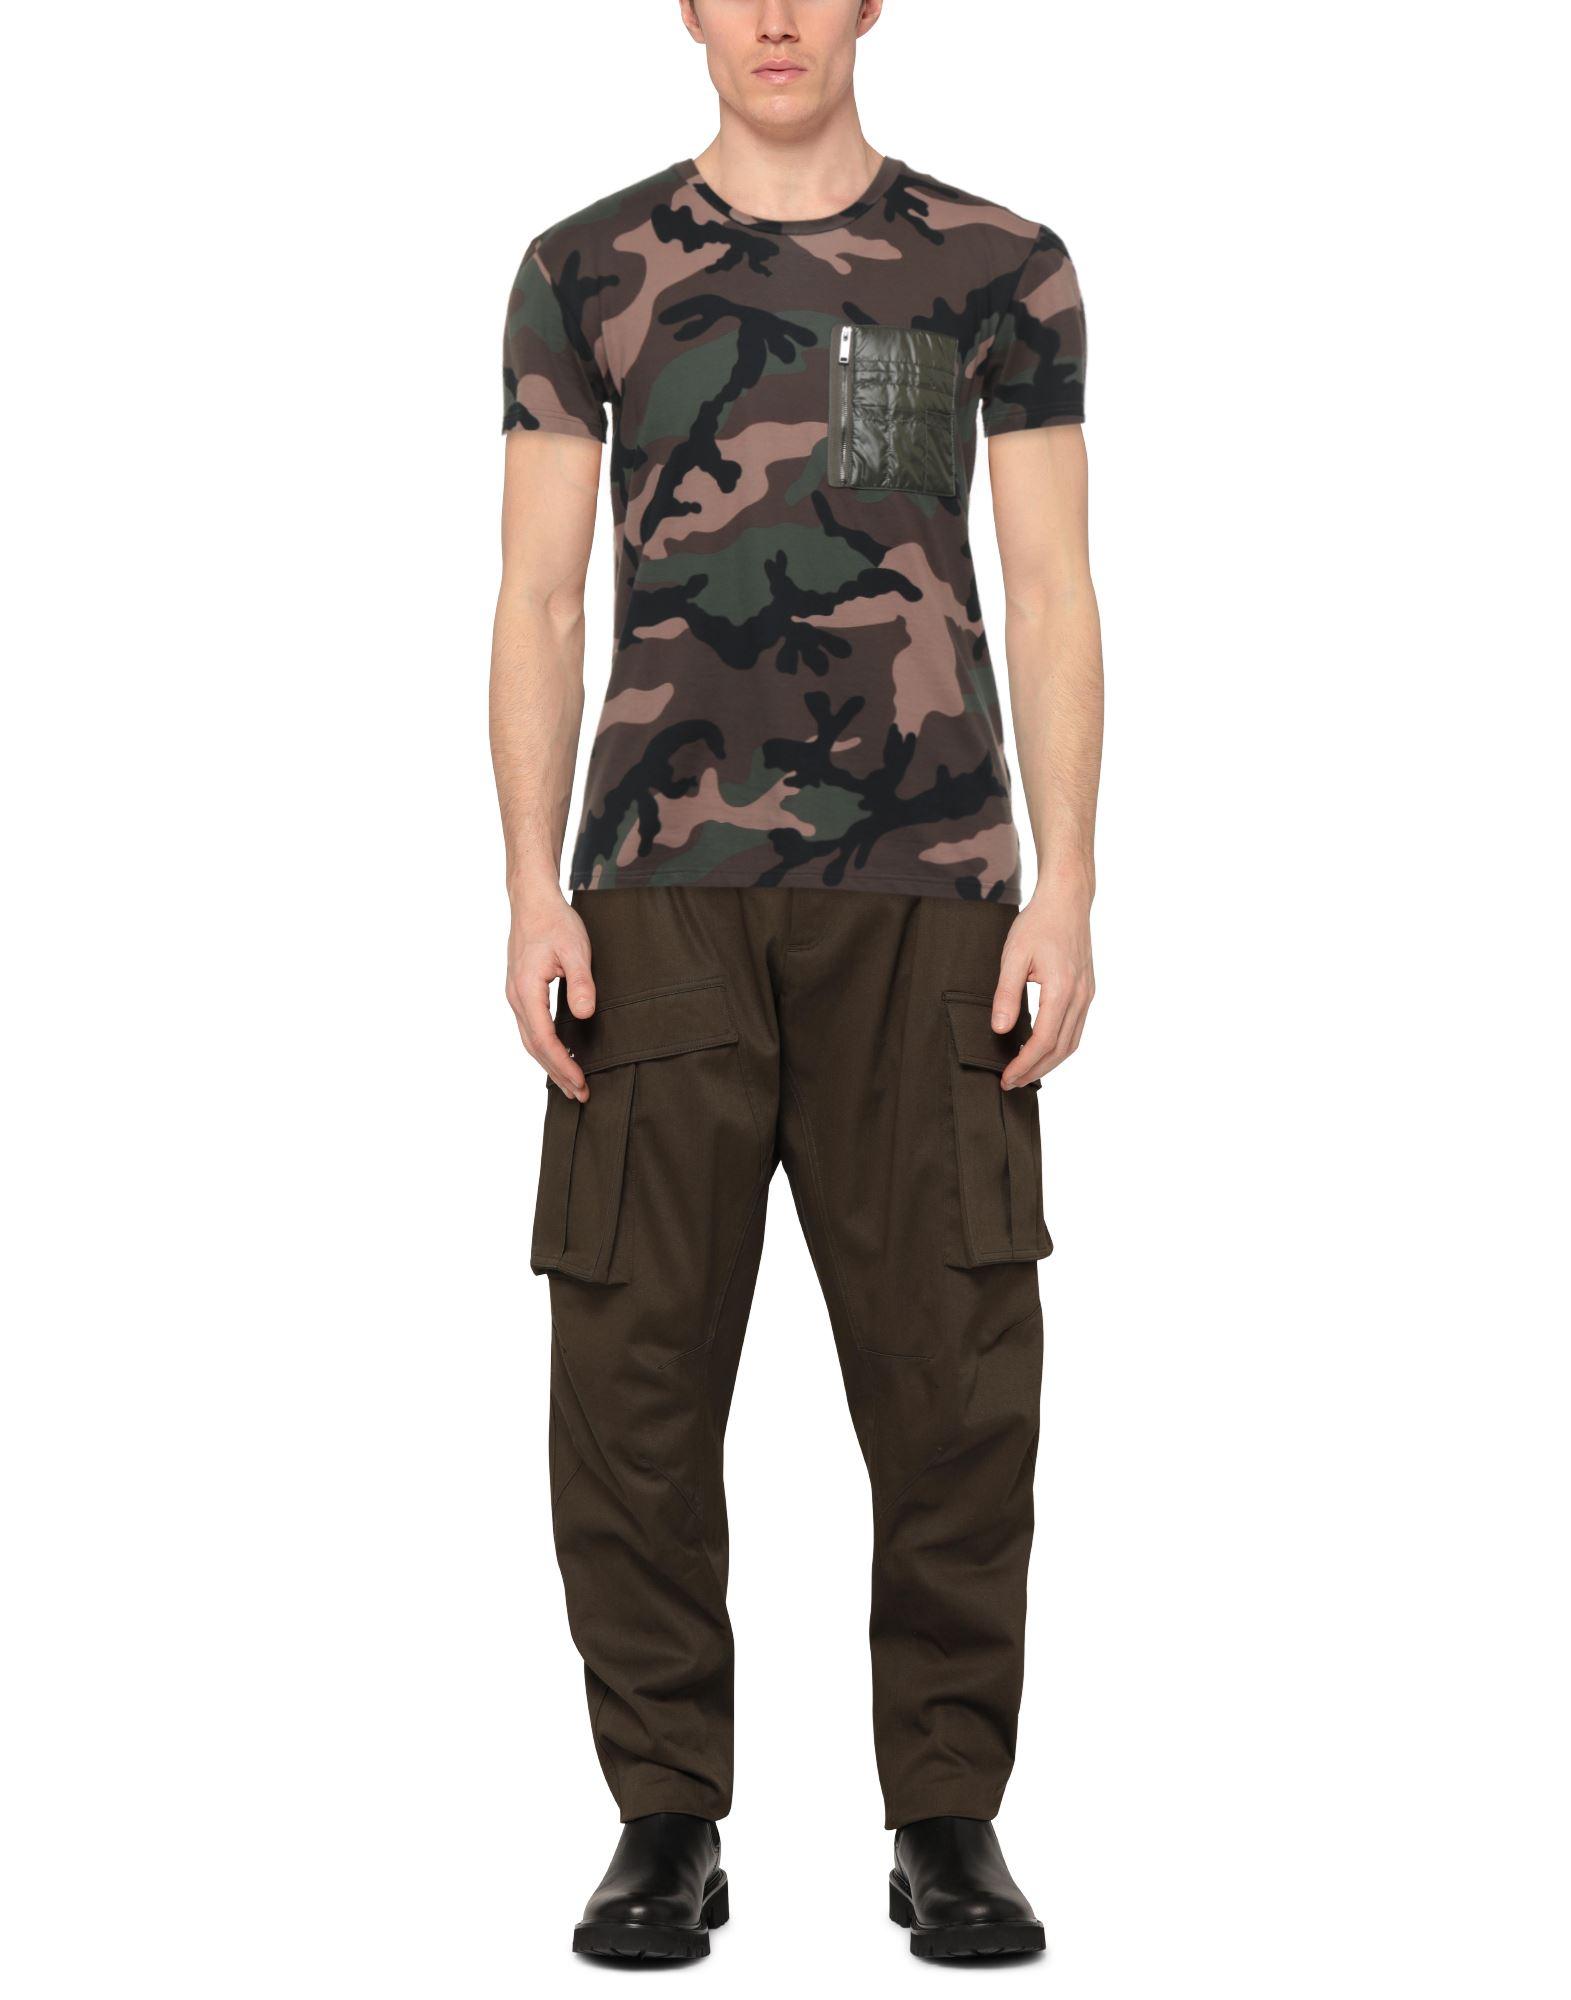 Valentino Cotton T-shirt in Military Green (Green) for Men - Lyst